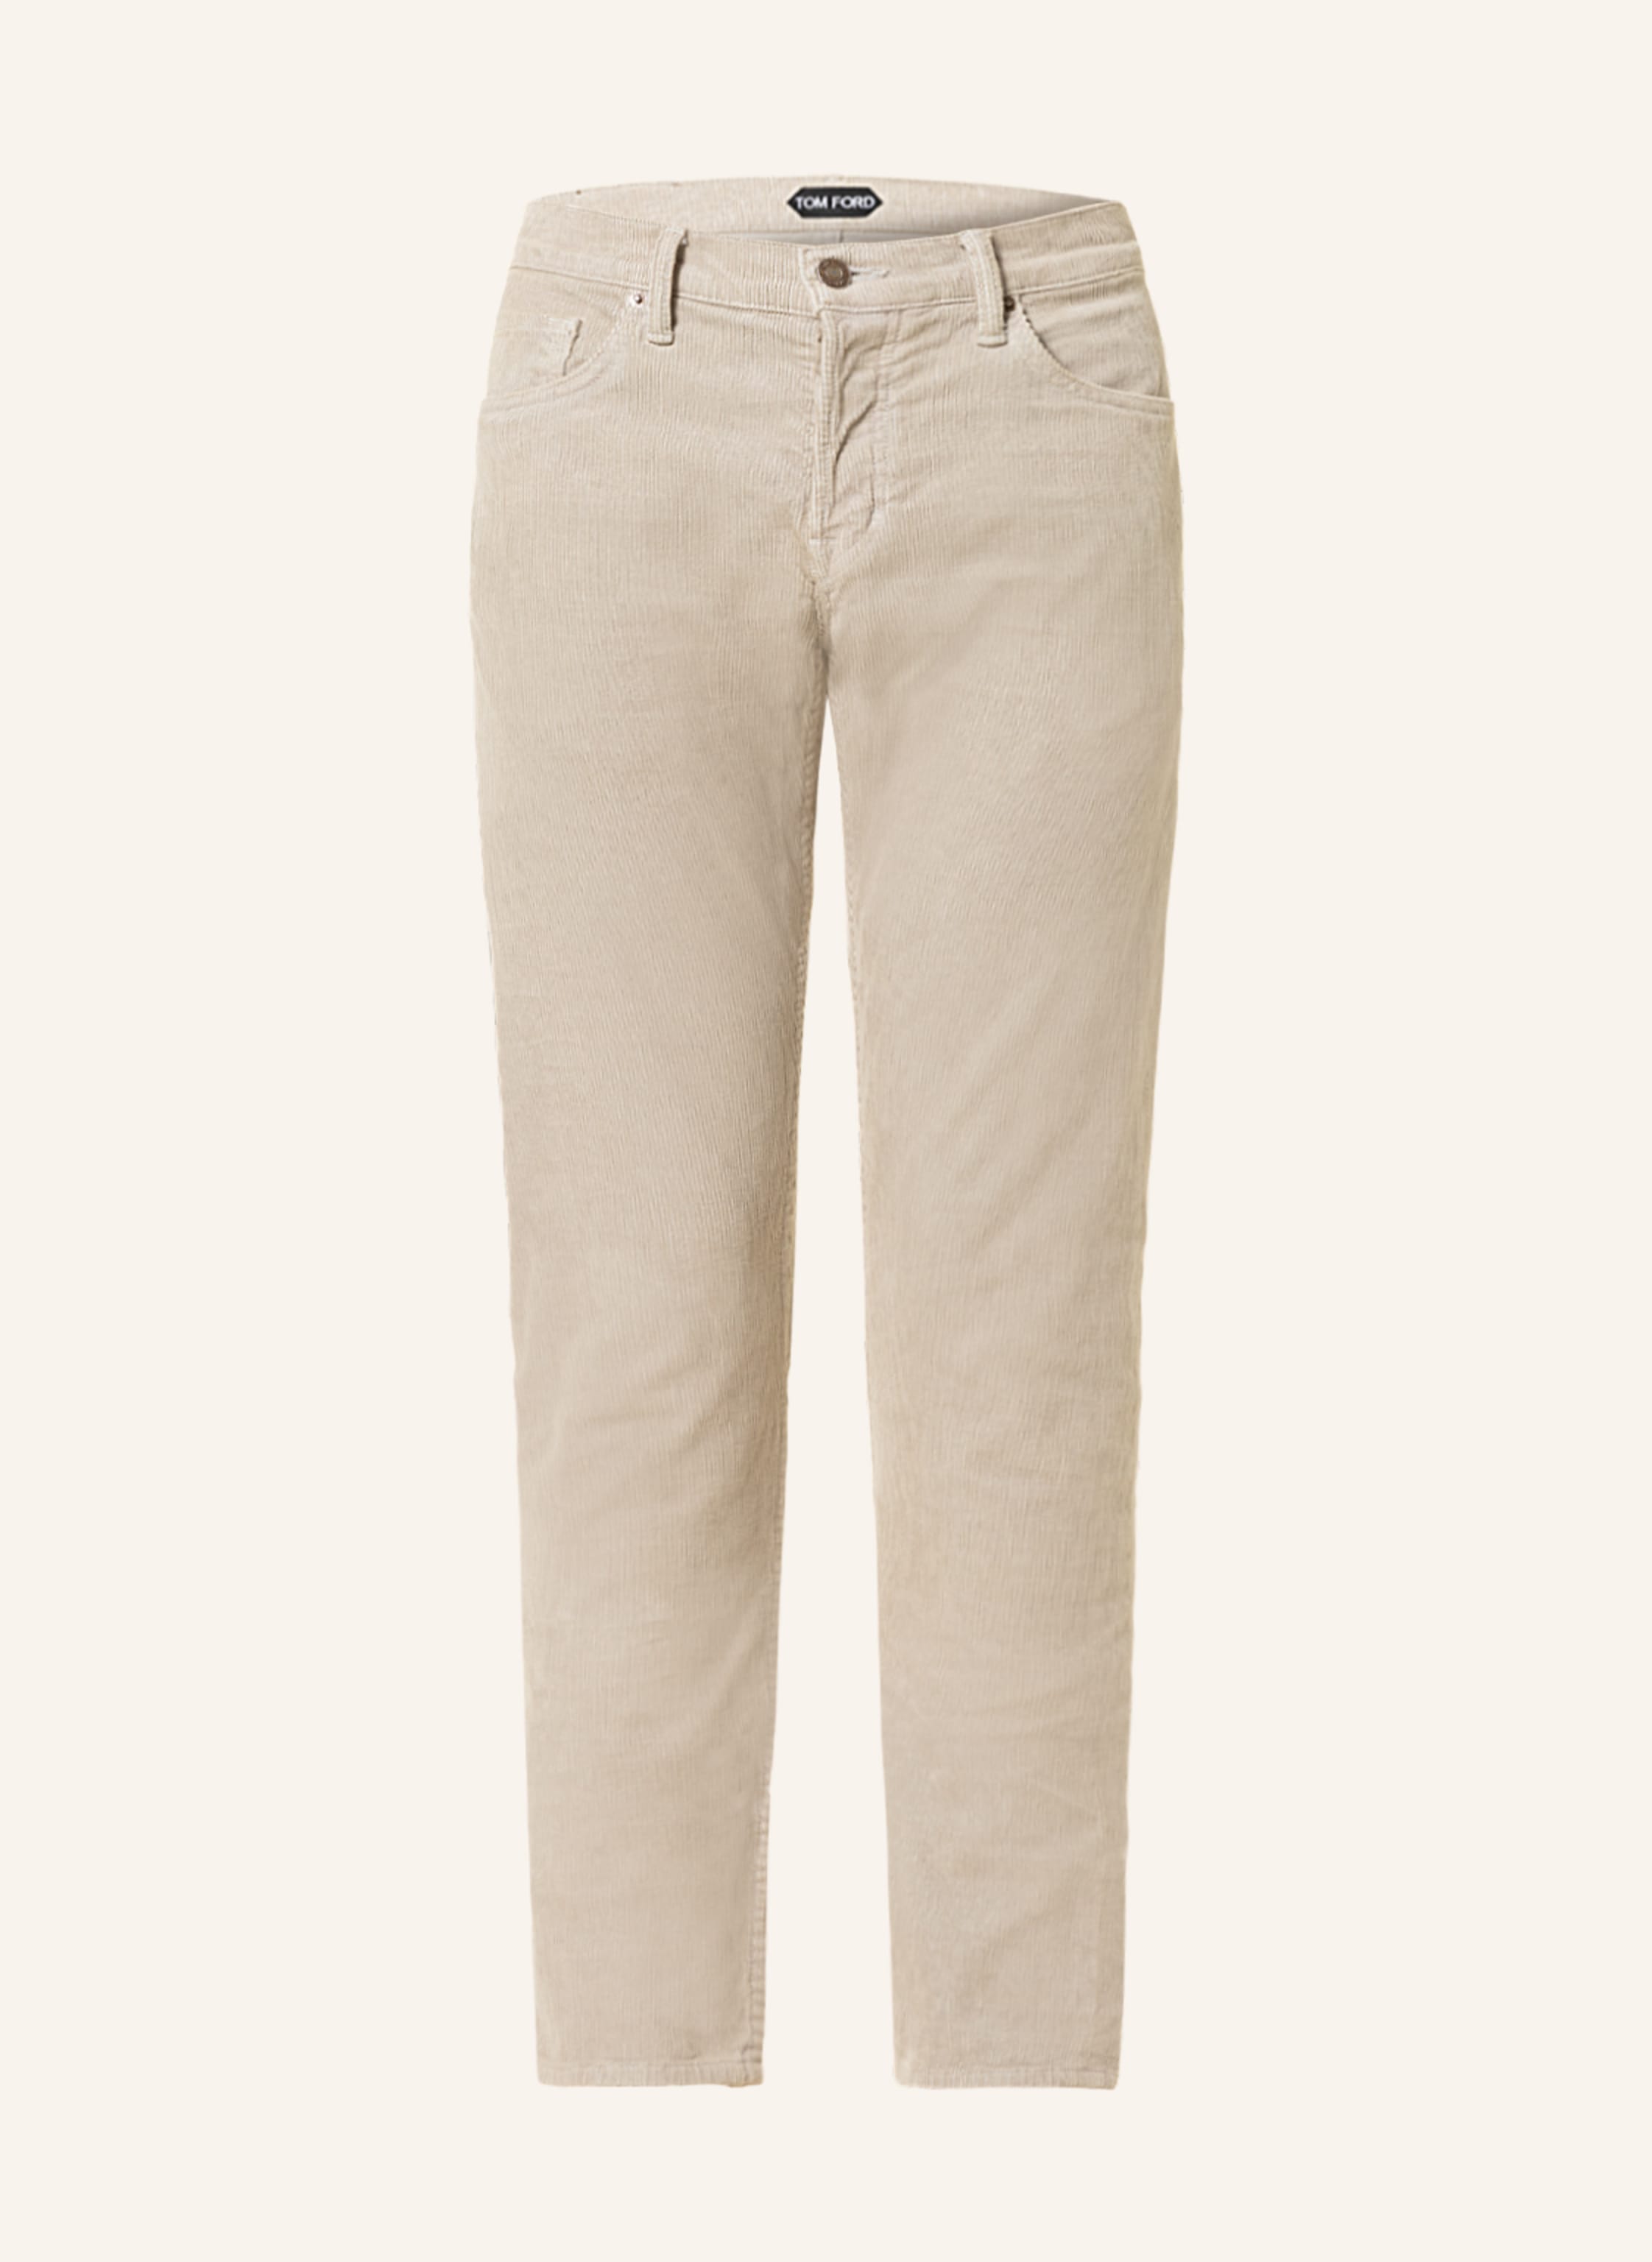 TOM FORD Corduroy trousers slim fit in gray | Breuninger